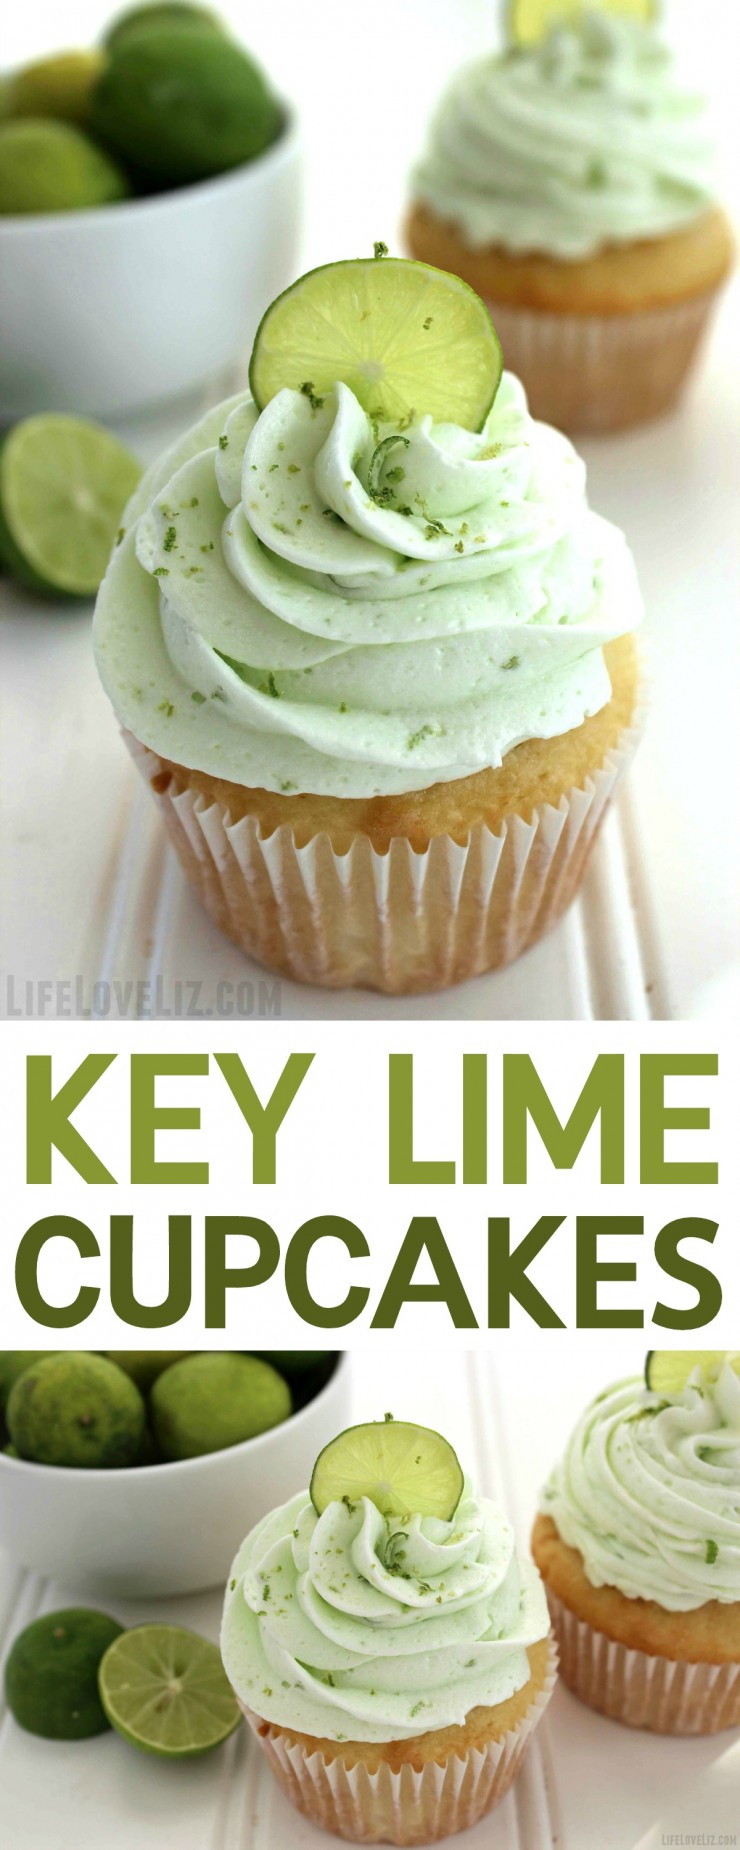 These Key Lime Cupcakes are a fun take on a traditional key lime pie featuring a delicious lime cake topped off with luscious fluffy key lime buttercream.